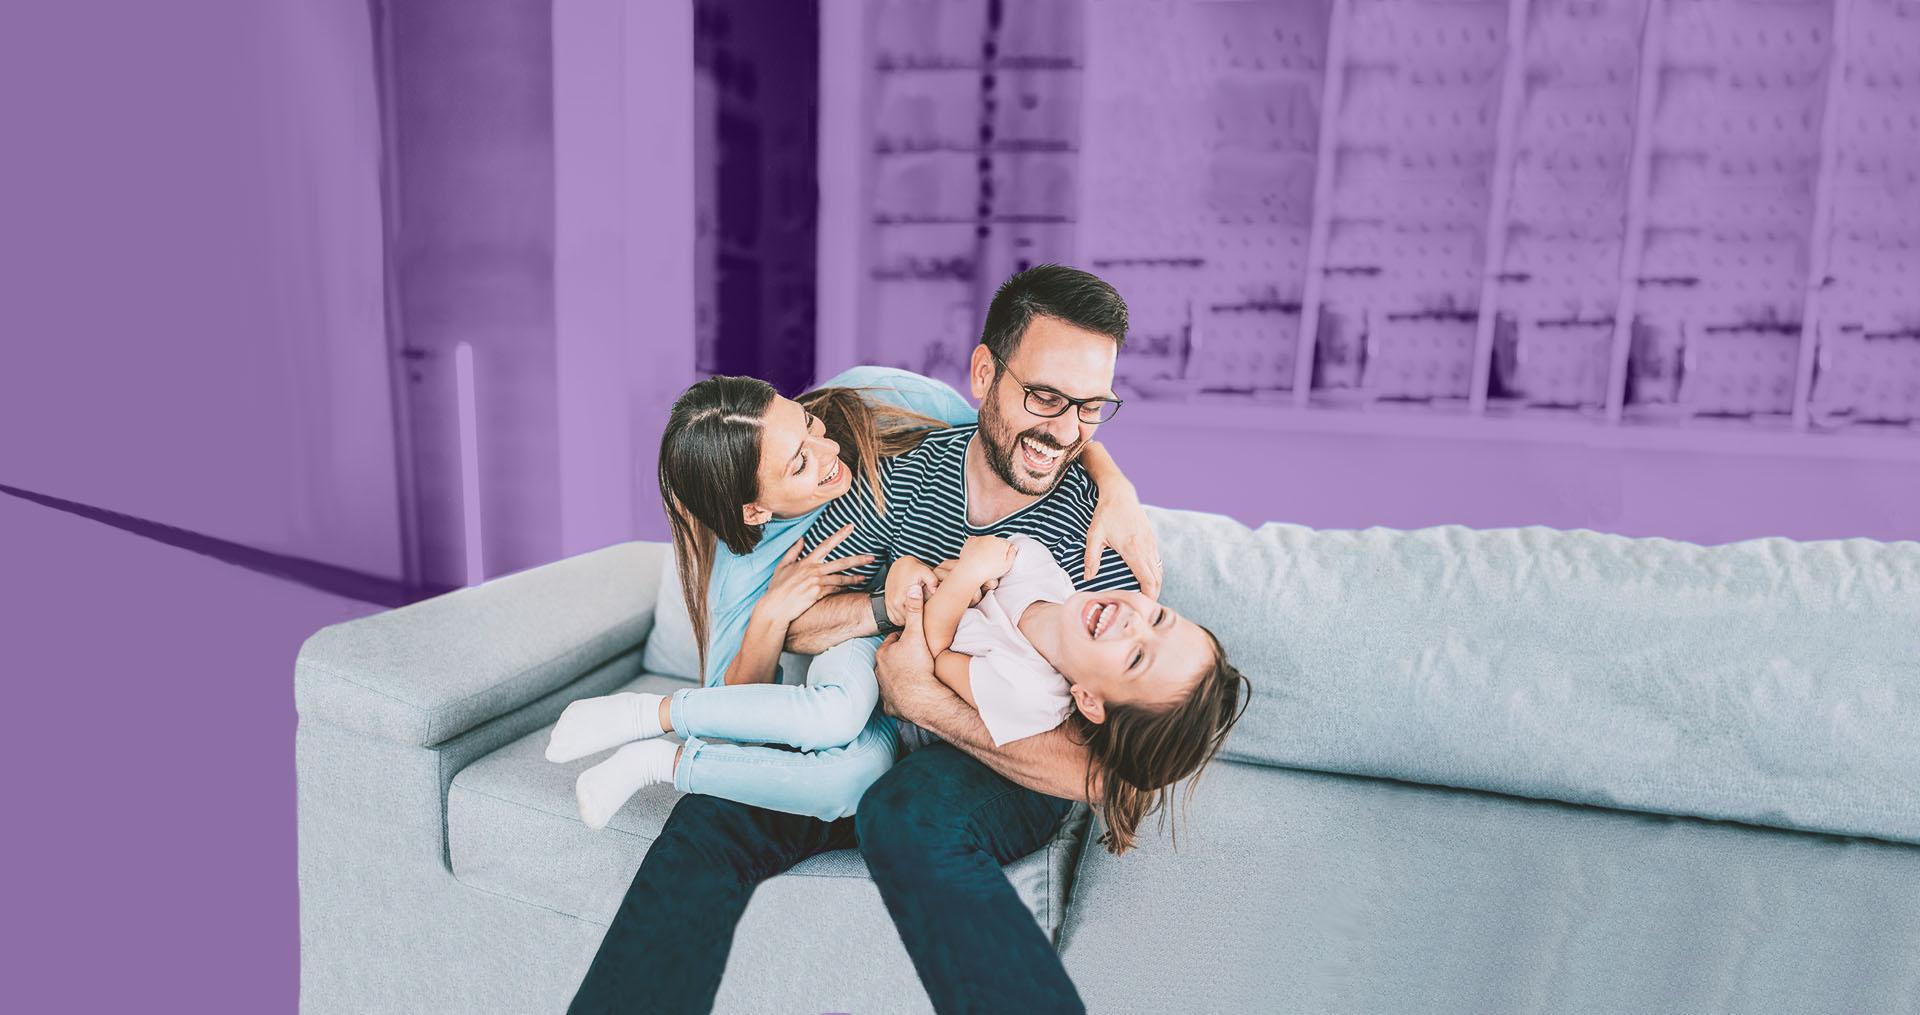 Image of a family laughing 和 sitting on a couch